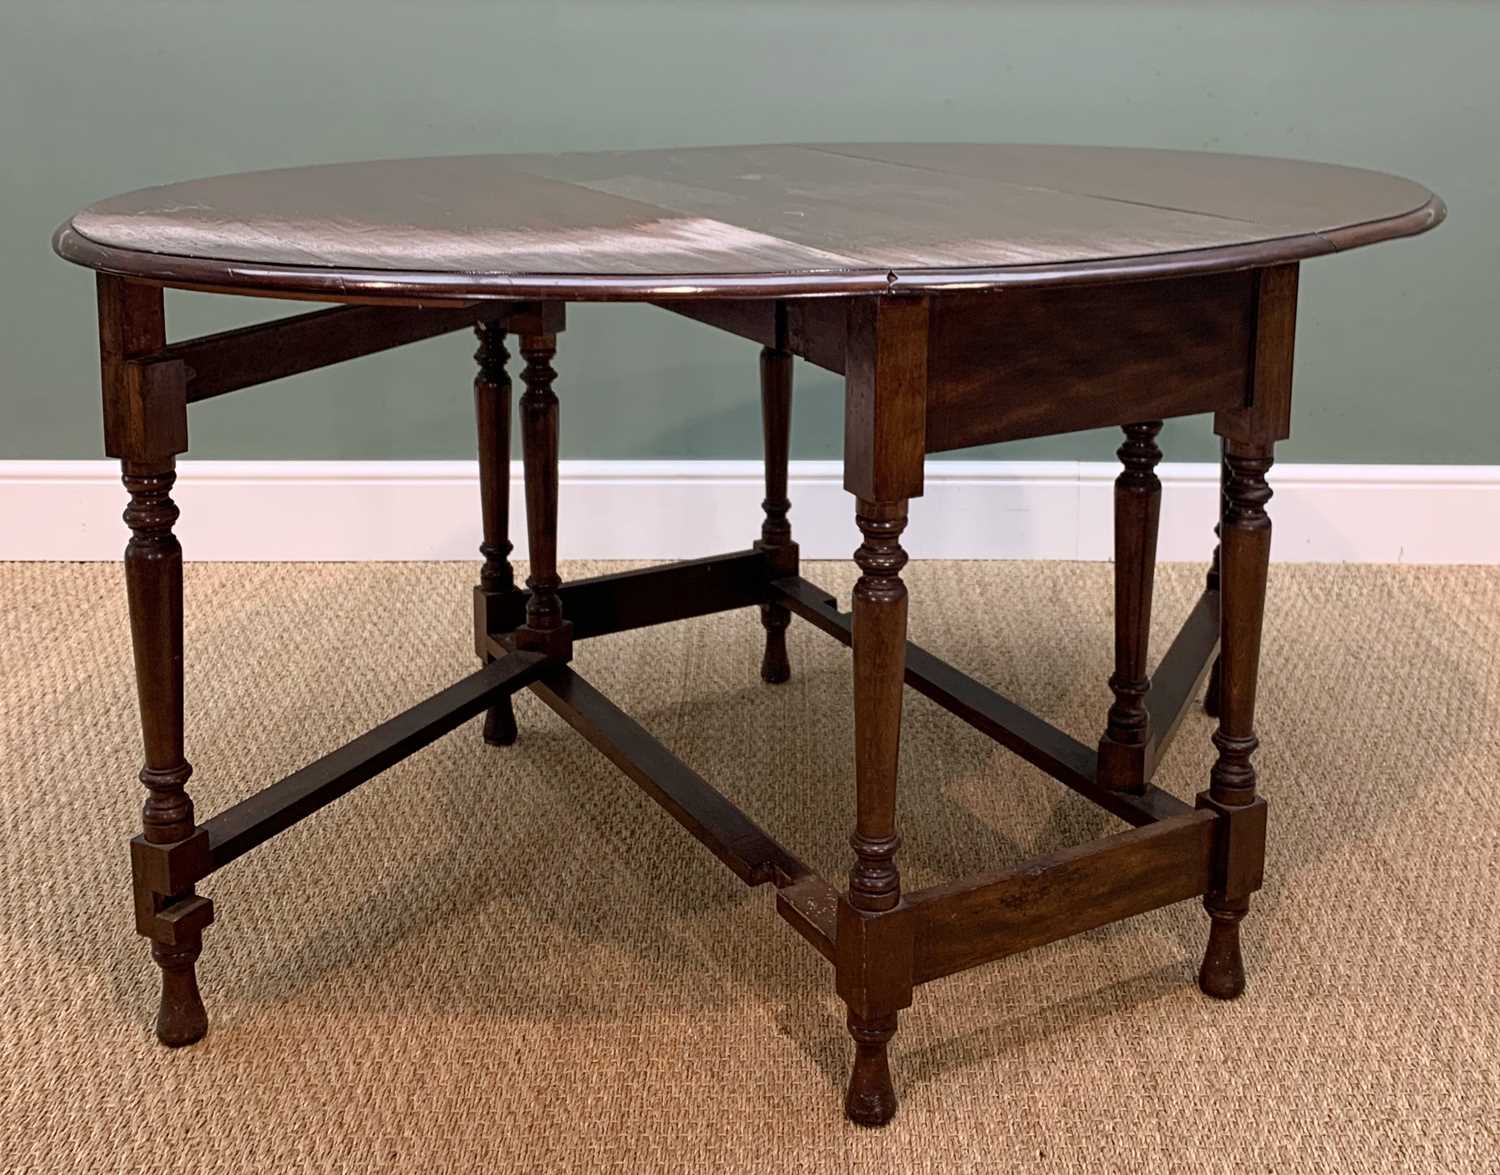 LATE 19TH C. MAHOGANY CHEST, GATELEG TABLE & CHAIRS, the chest north country or Scottish, fitted - Image 9 of 11